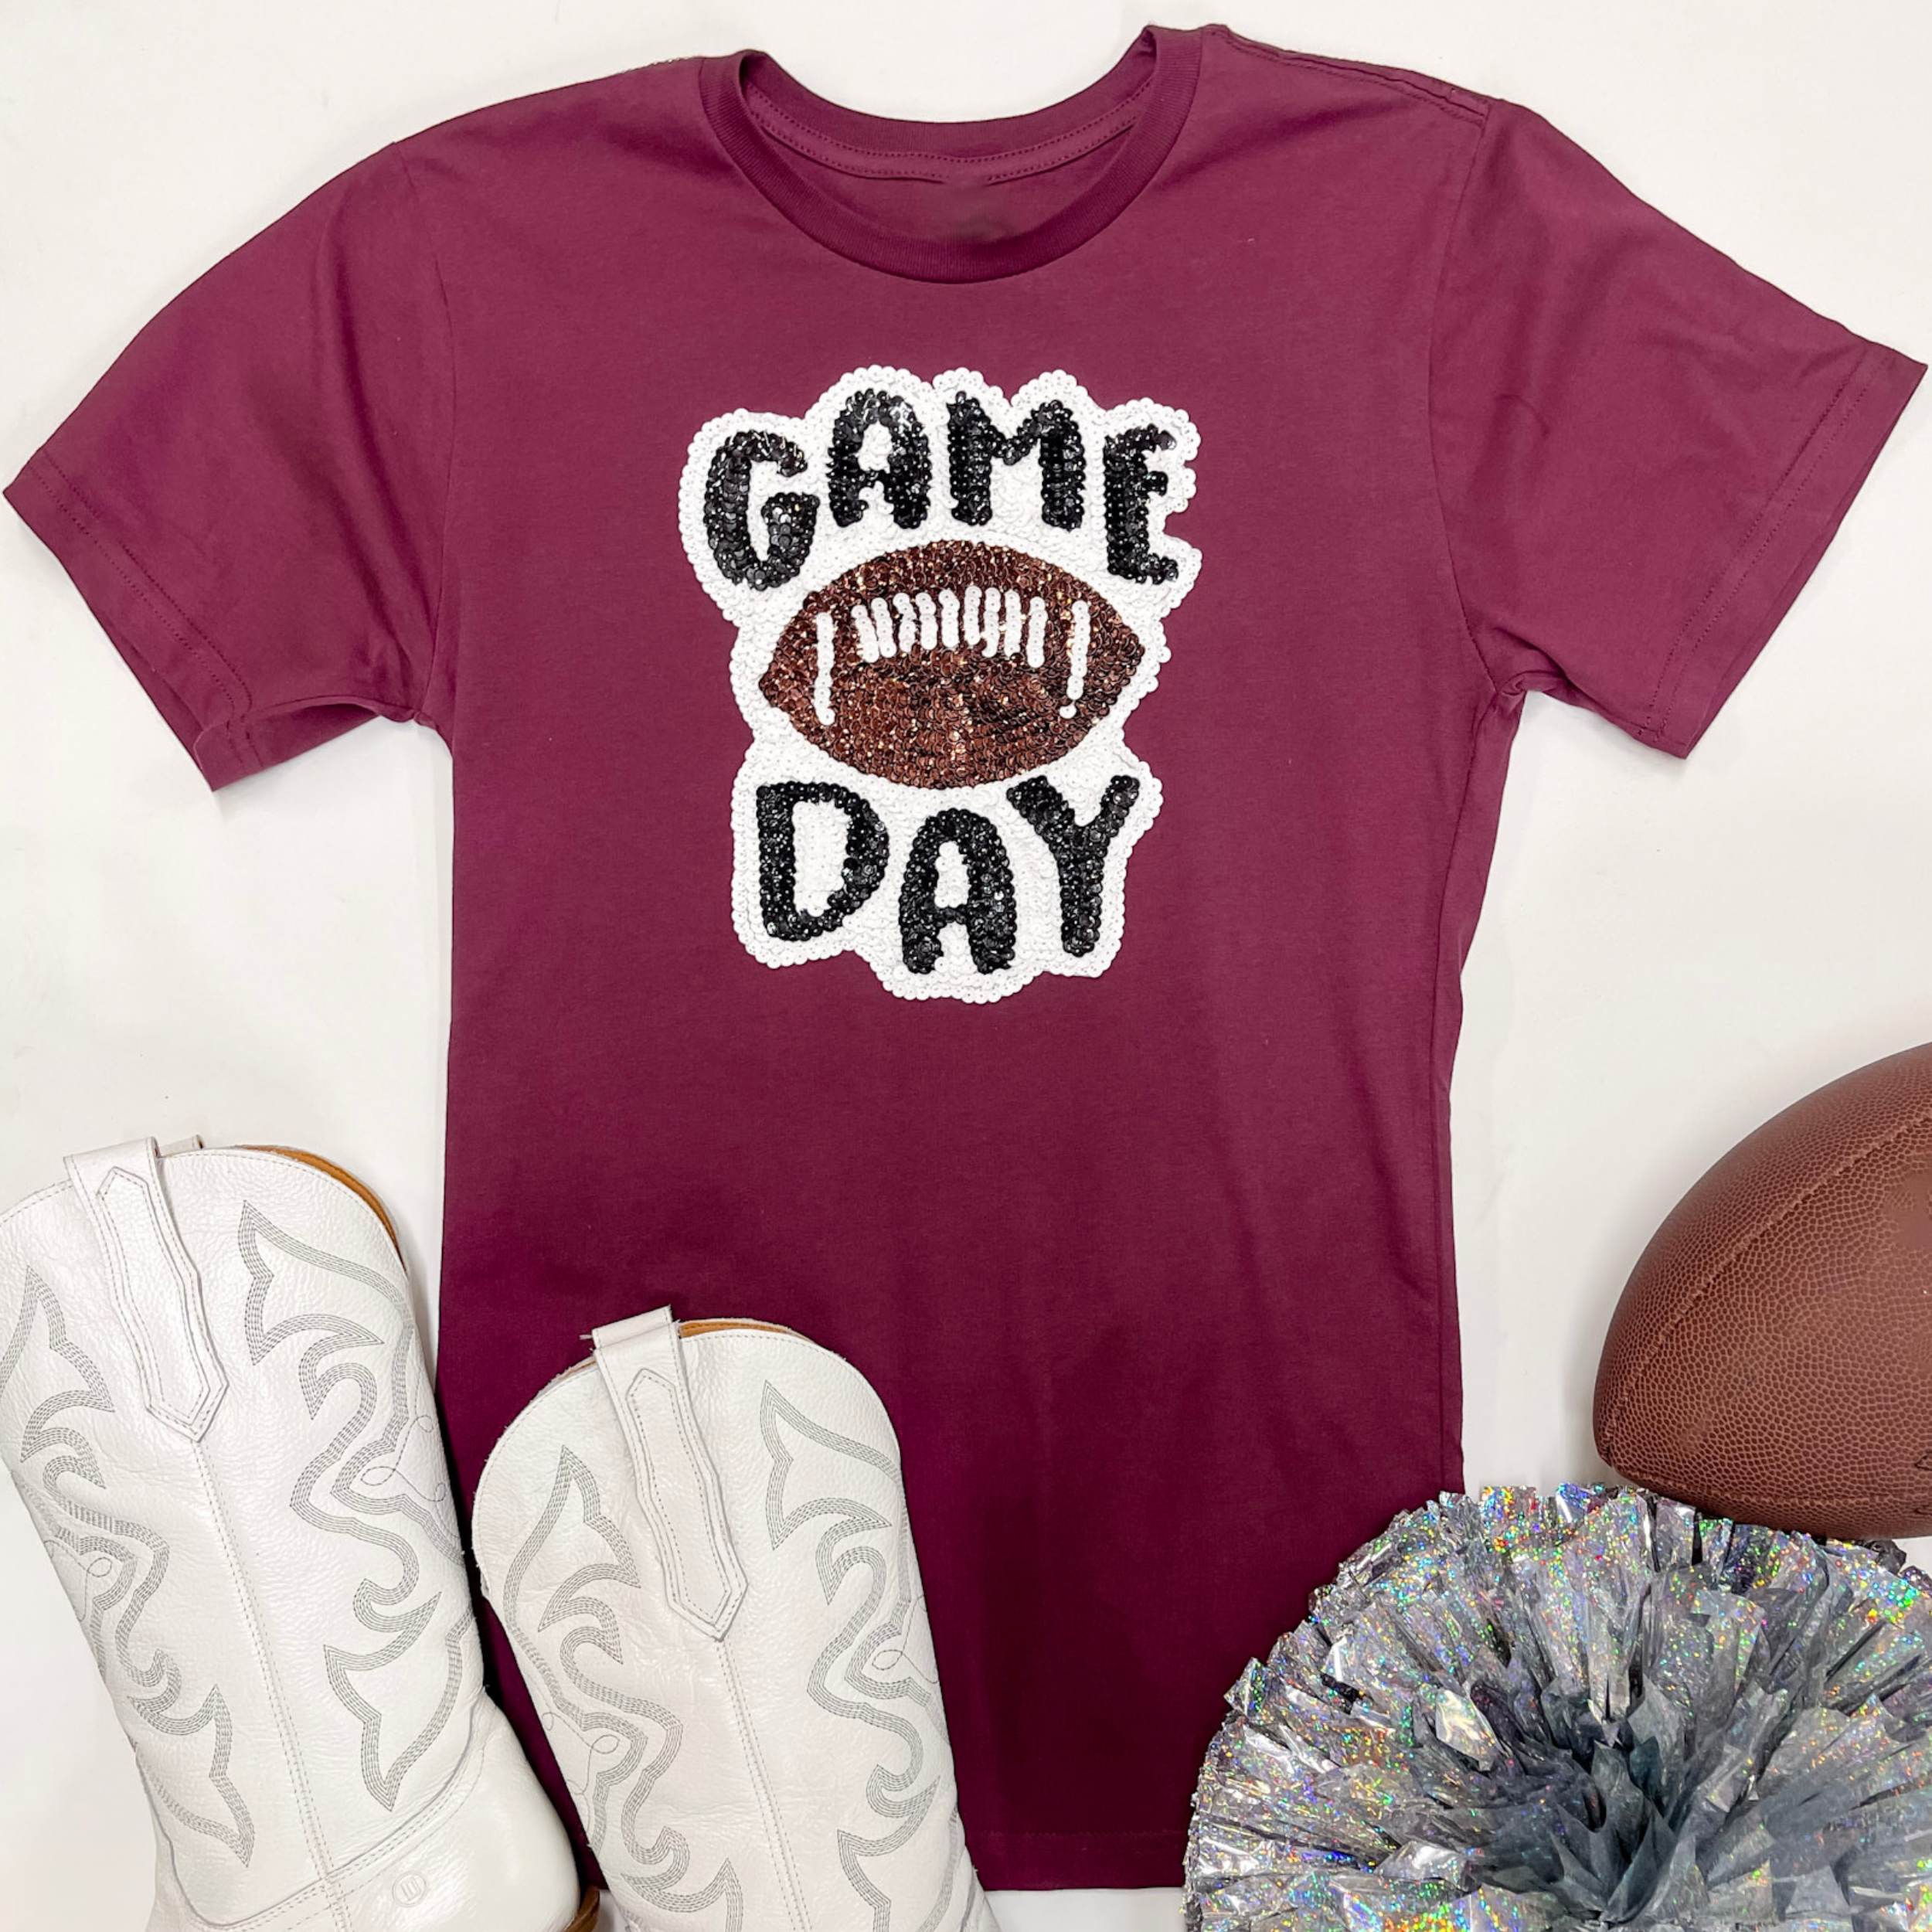 A maroon short sleeve graphic tee with a sequin patch. pictured on a white background with a silver pom pom and white boots.